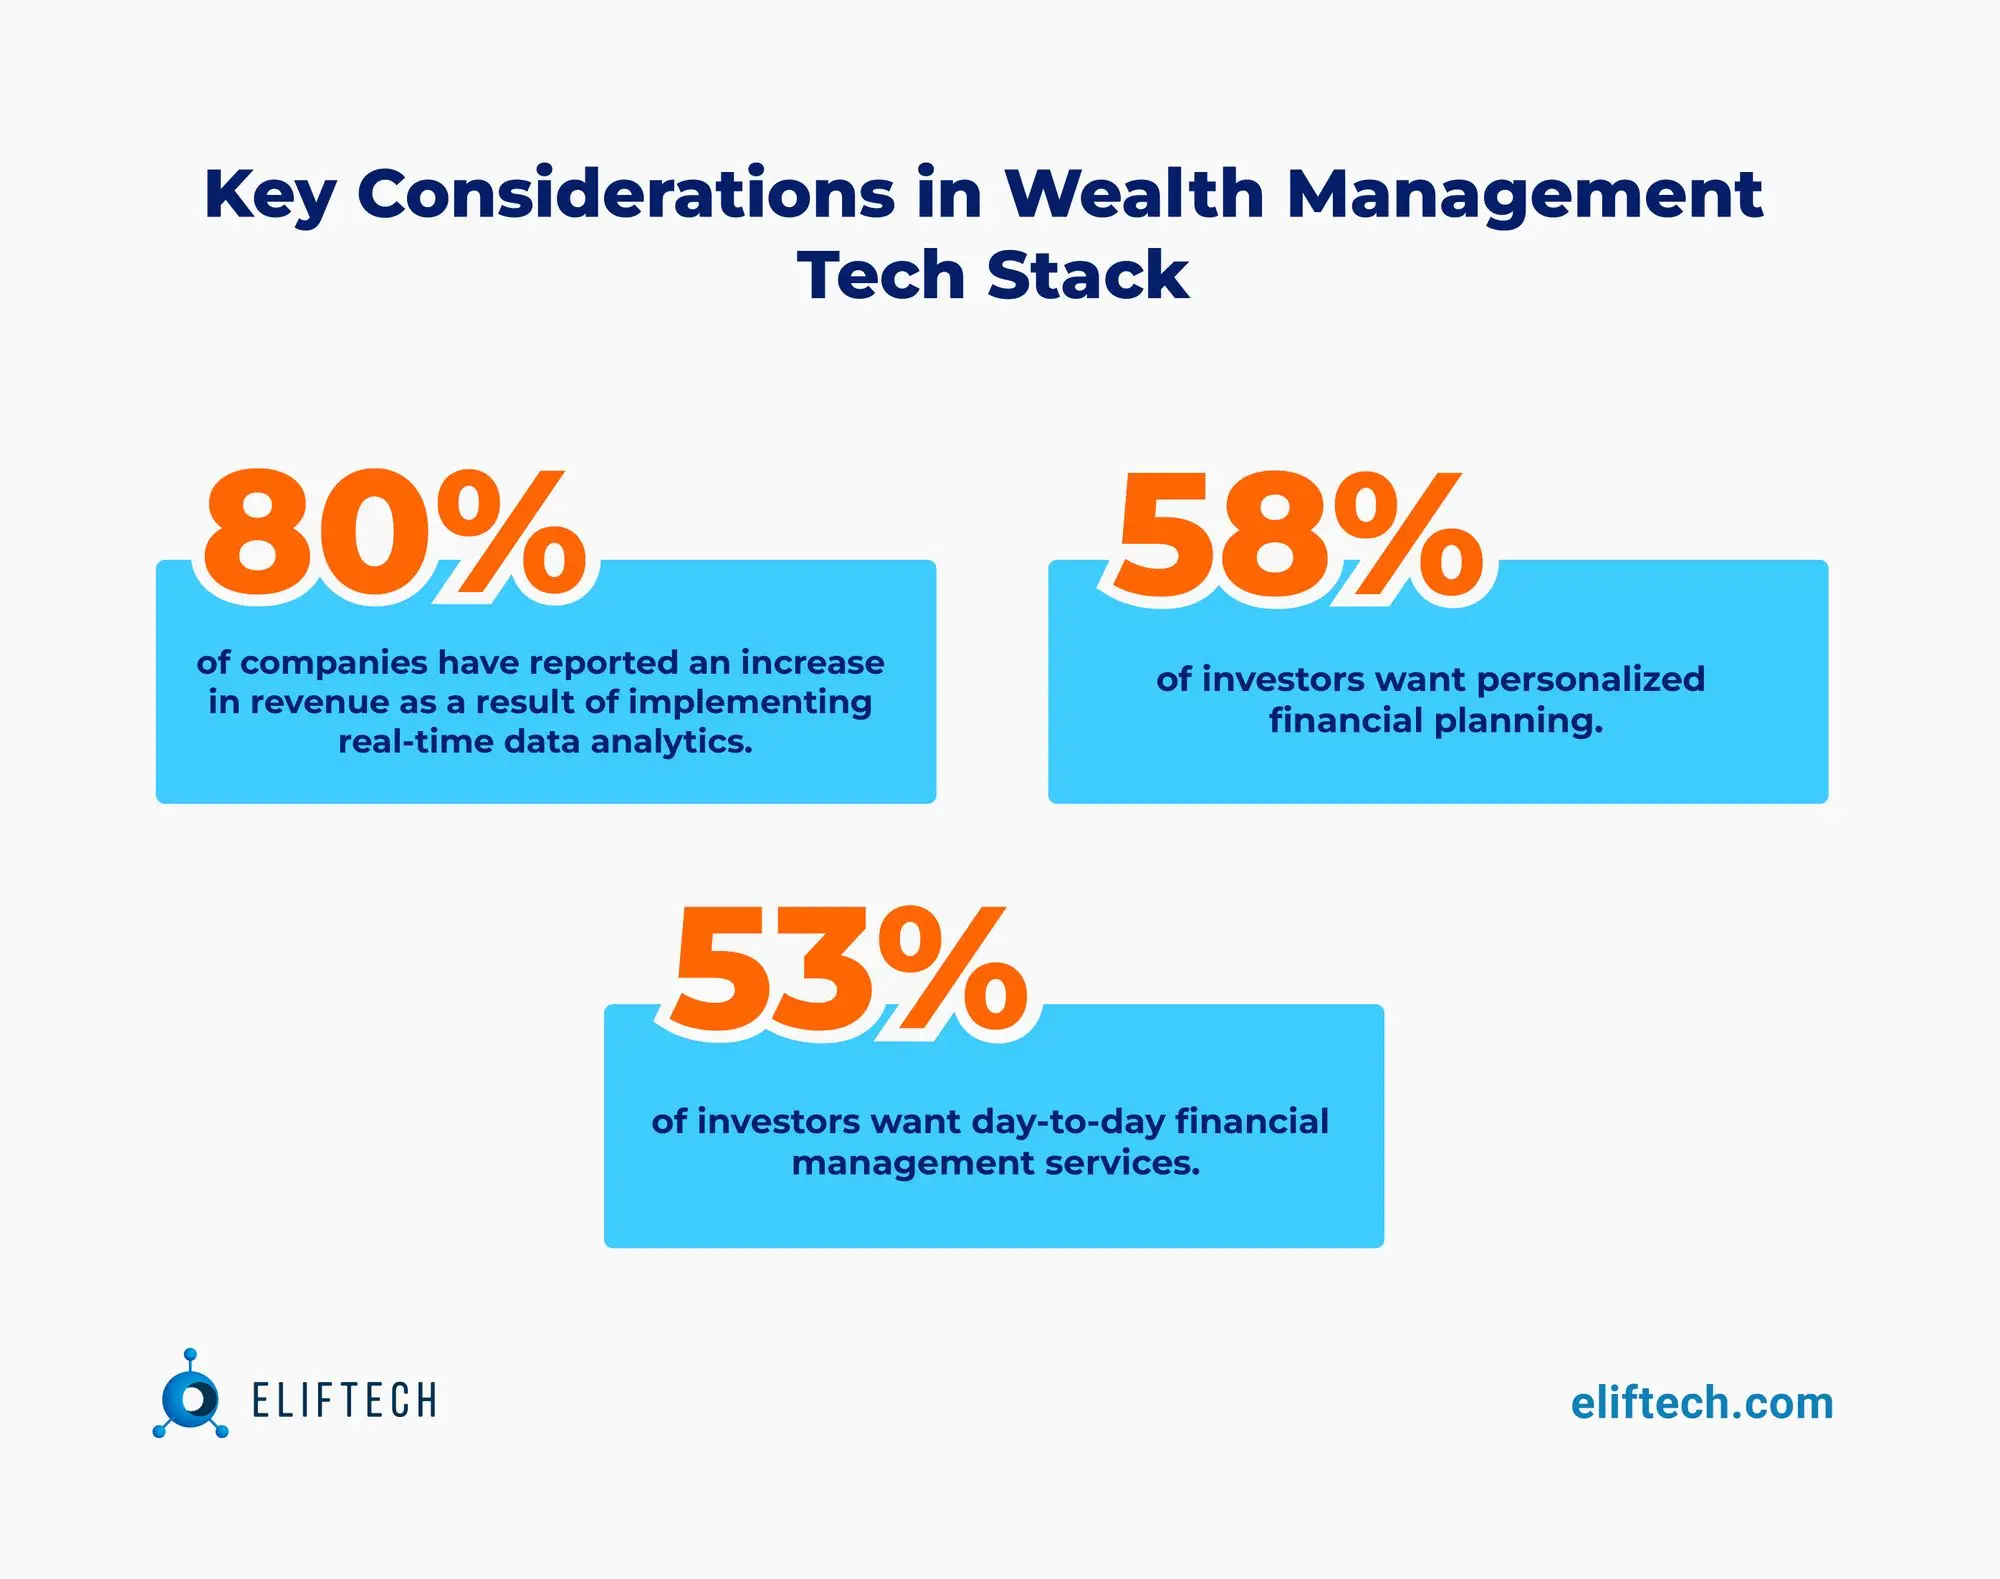 Wealth Management Tech Stack: Key Considerations